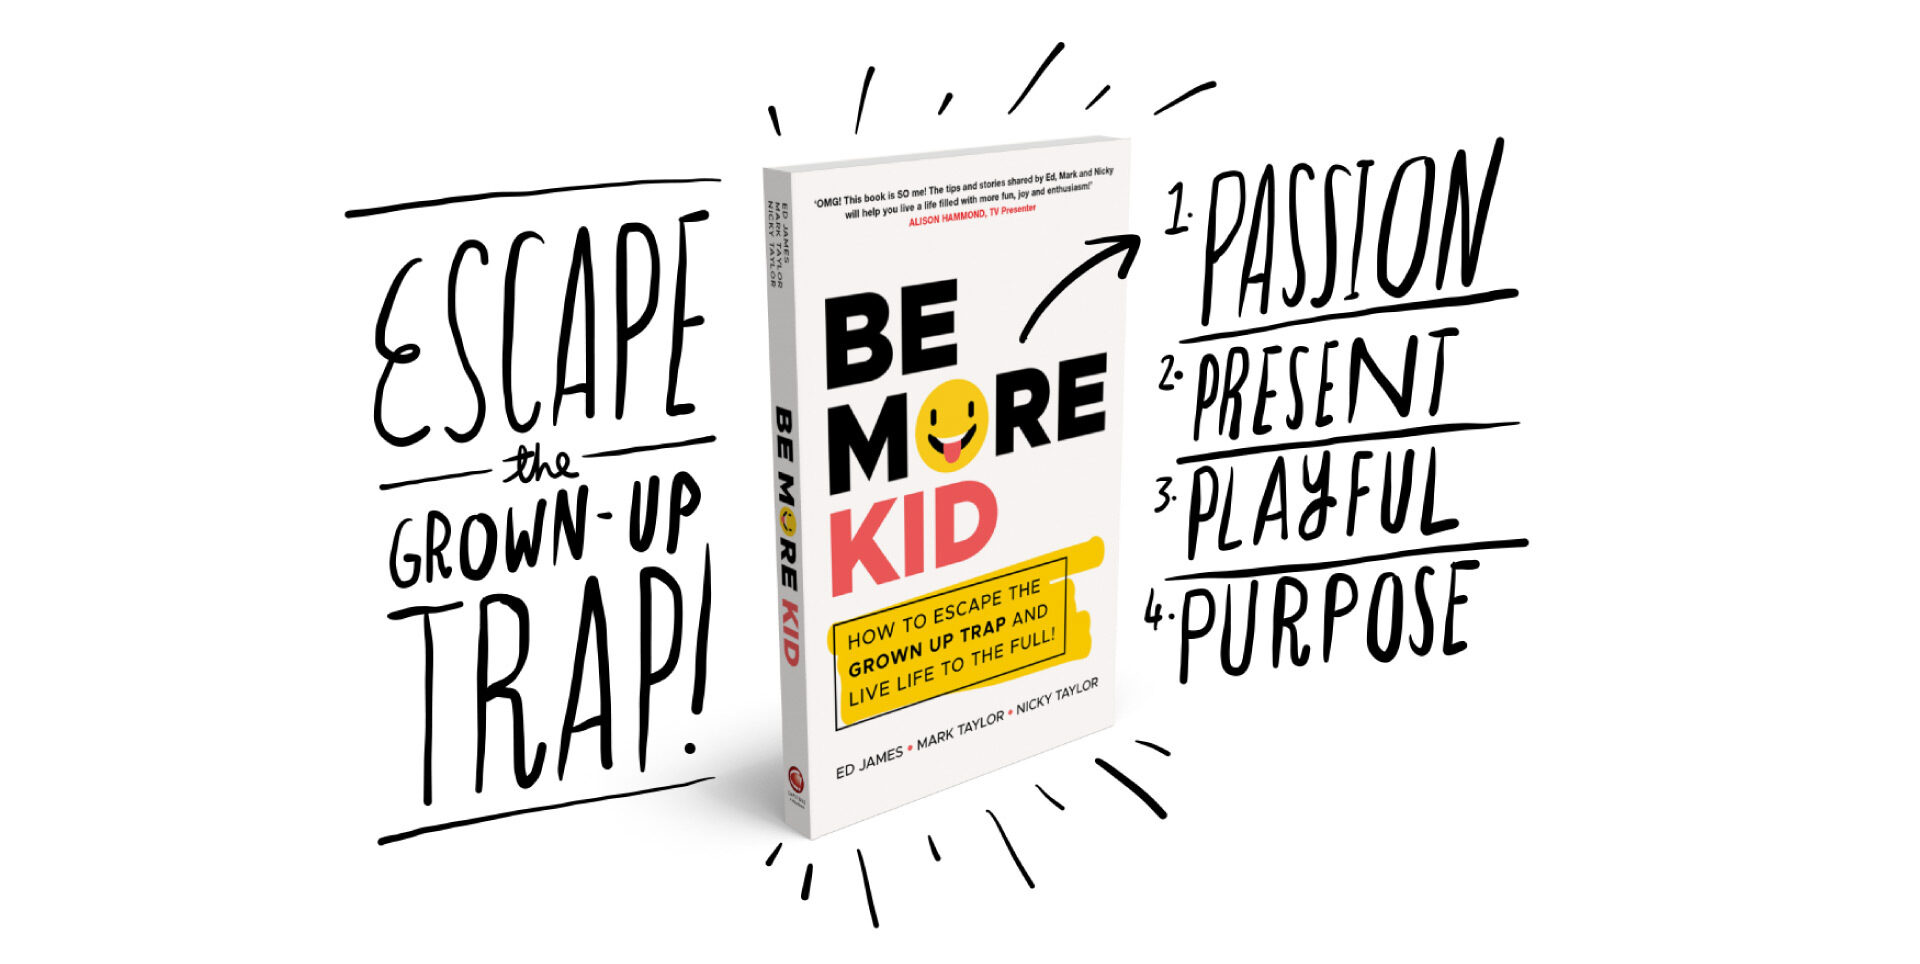 Photo of a book which reads 'Be More Kid on the cover'. The image is surrounded by text reading 'Escape the grown-up trap' and 'passion, present, playful, purspose.'